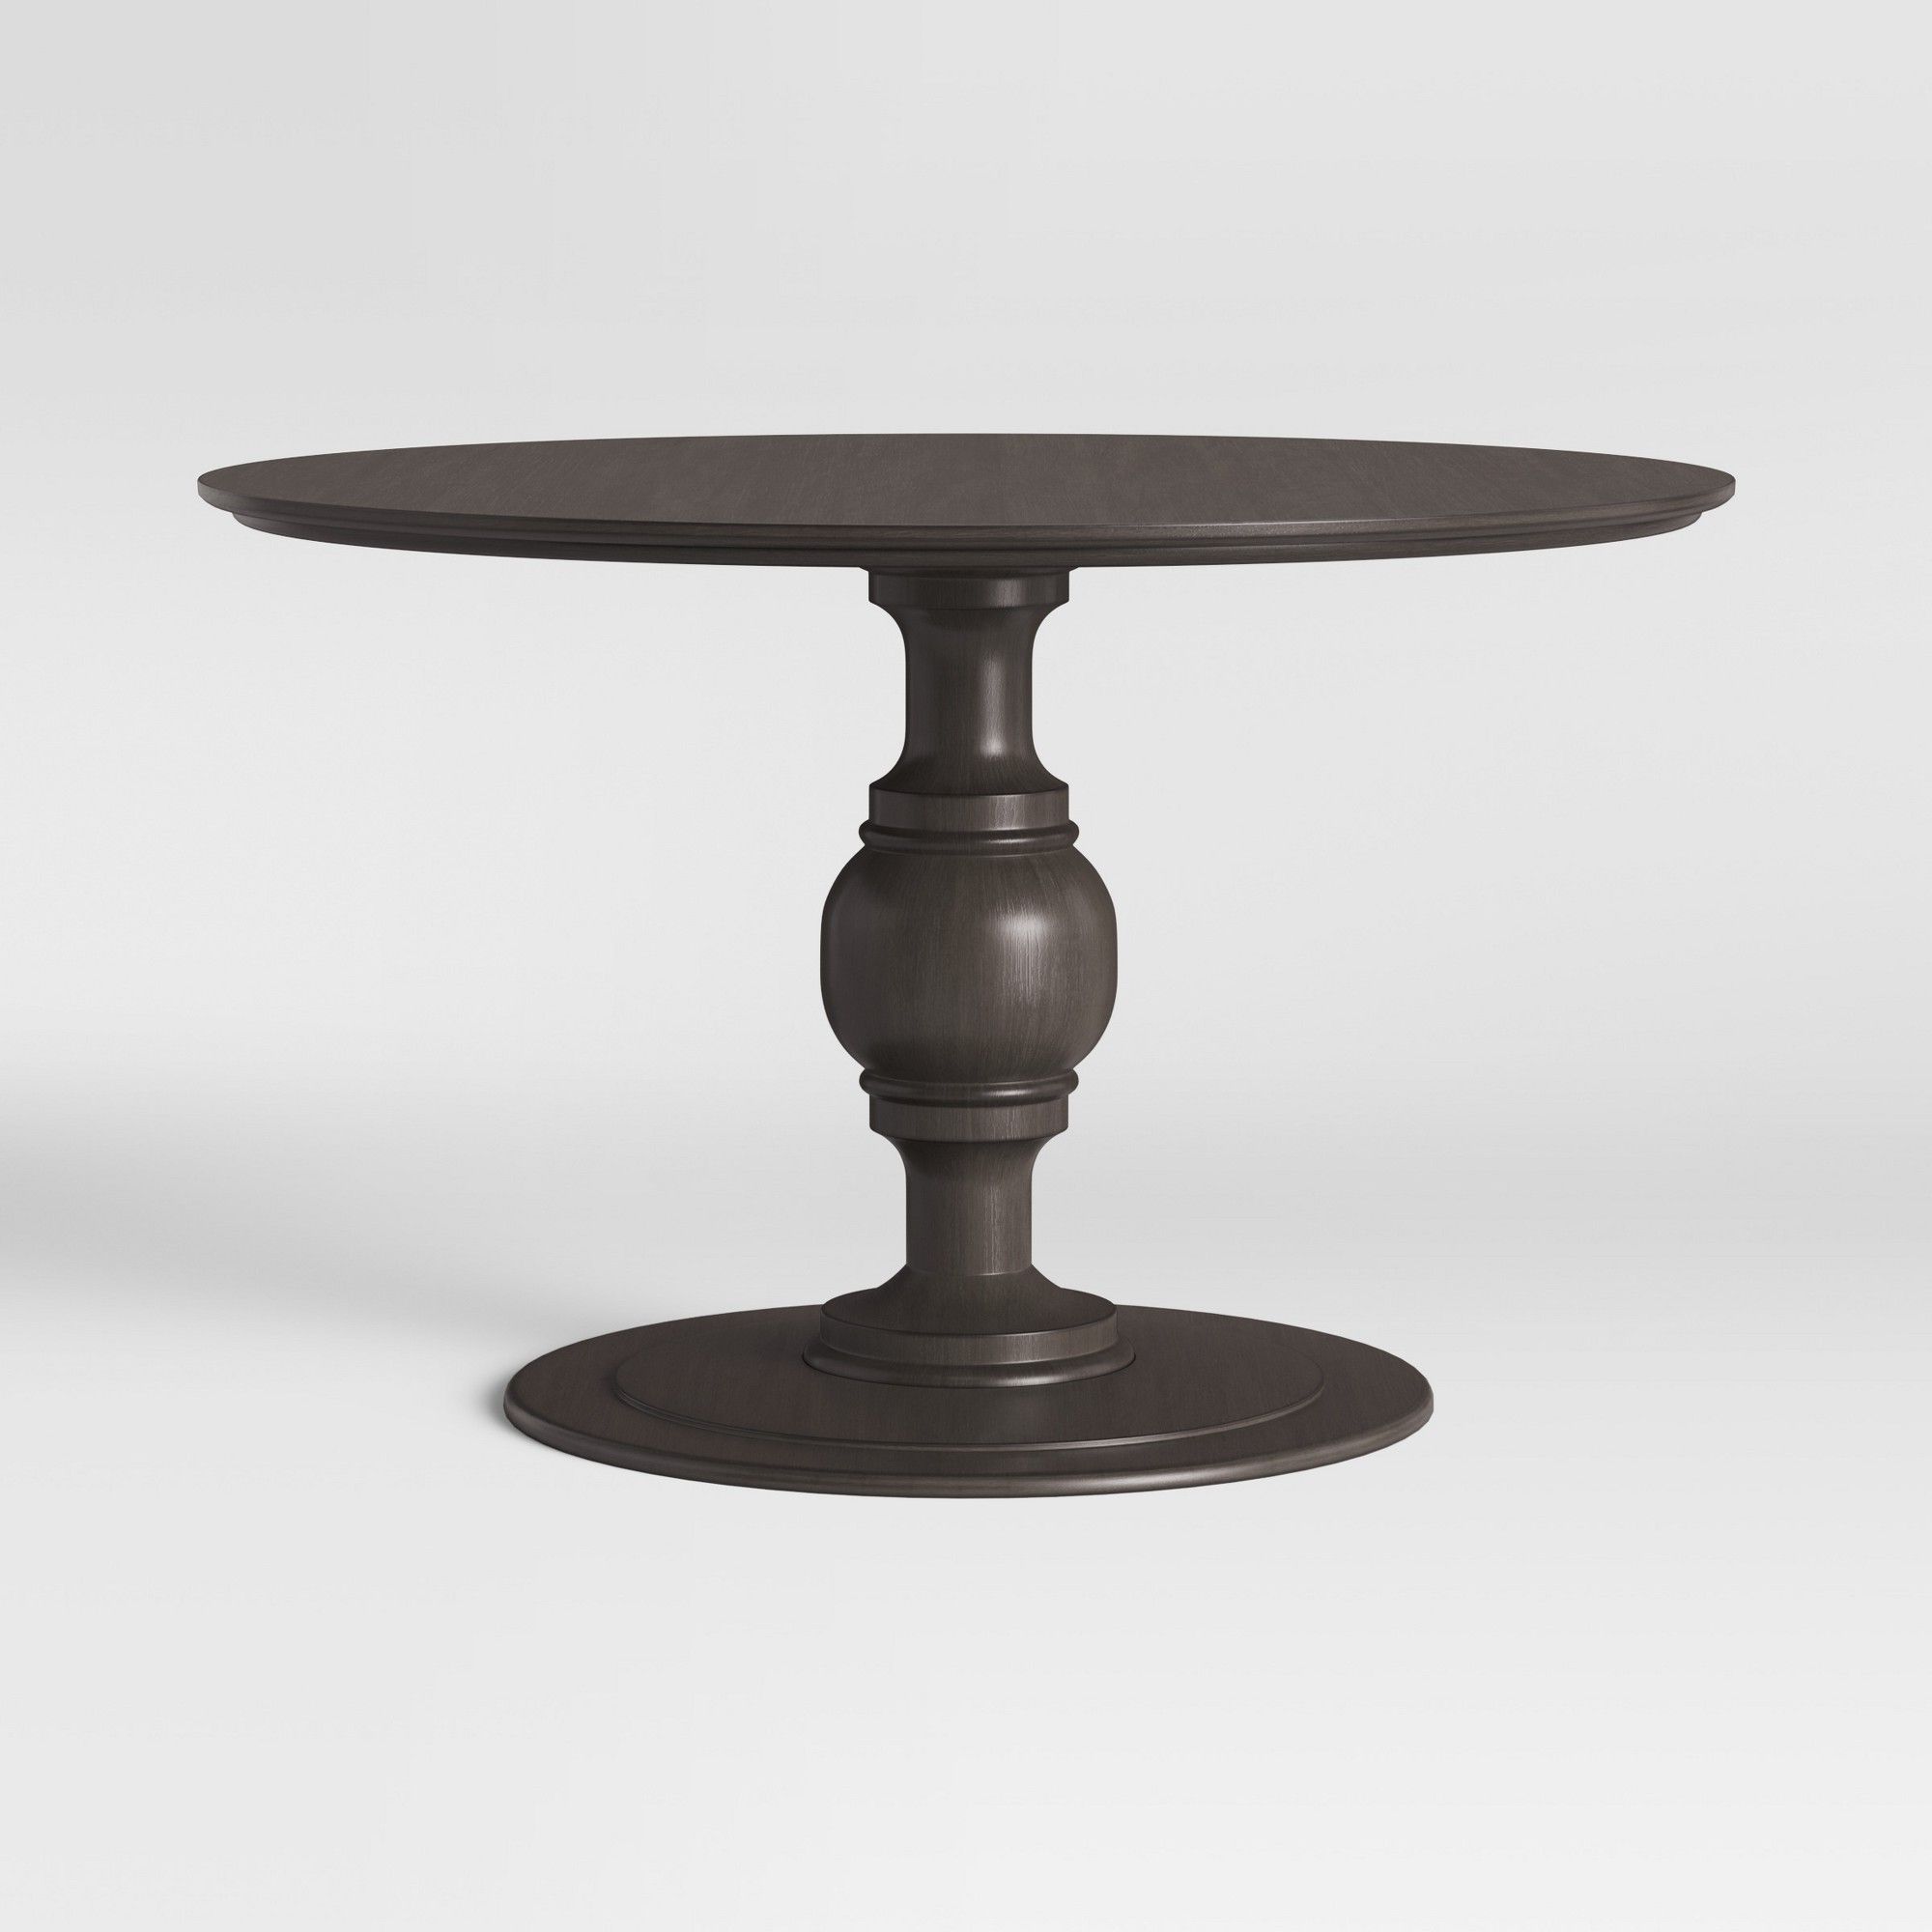 Dawson Pedestal Tables For Recent Byfield Pedestal Dining Table Reclaimed Oak Brown (View 3 of 25)